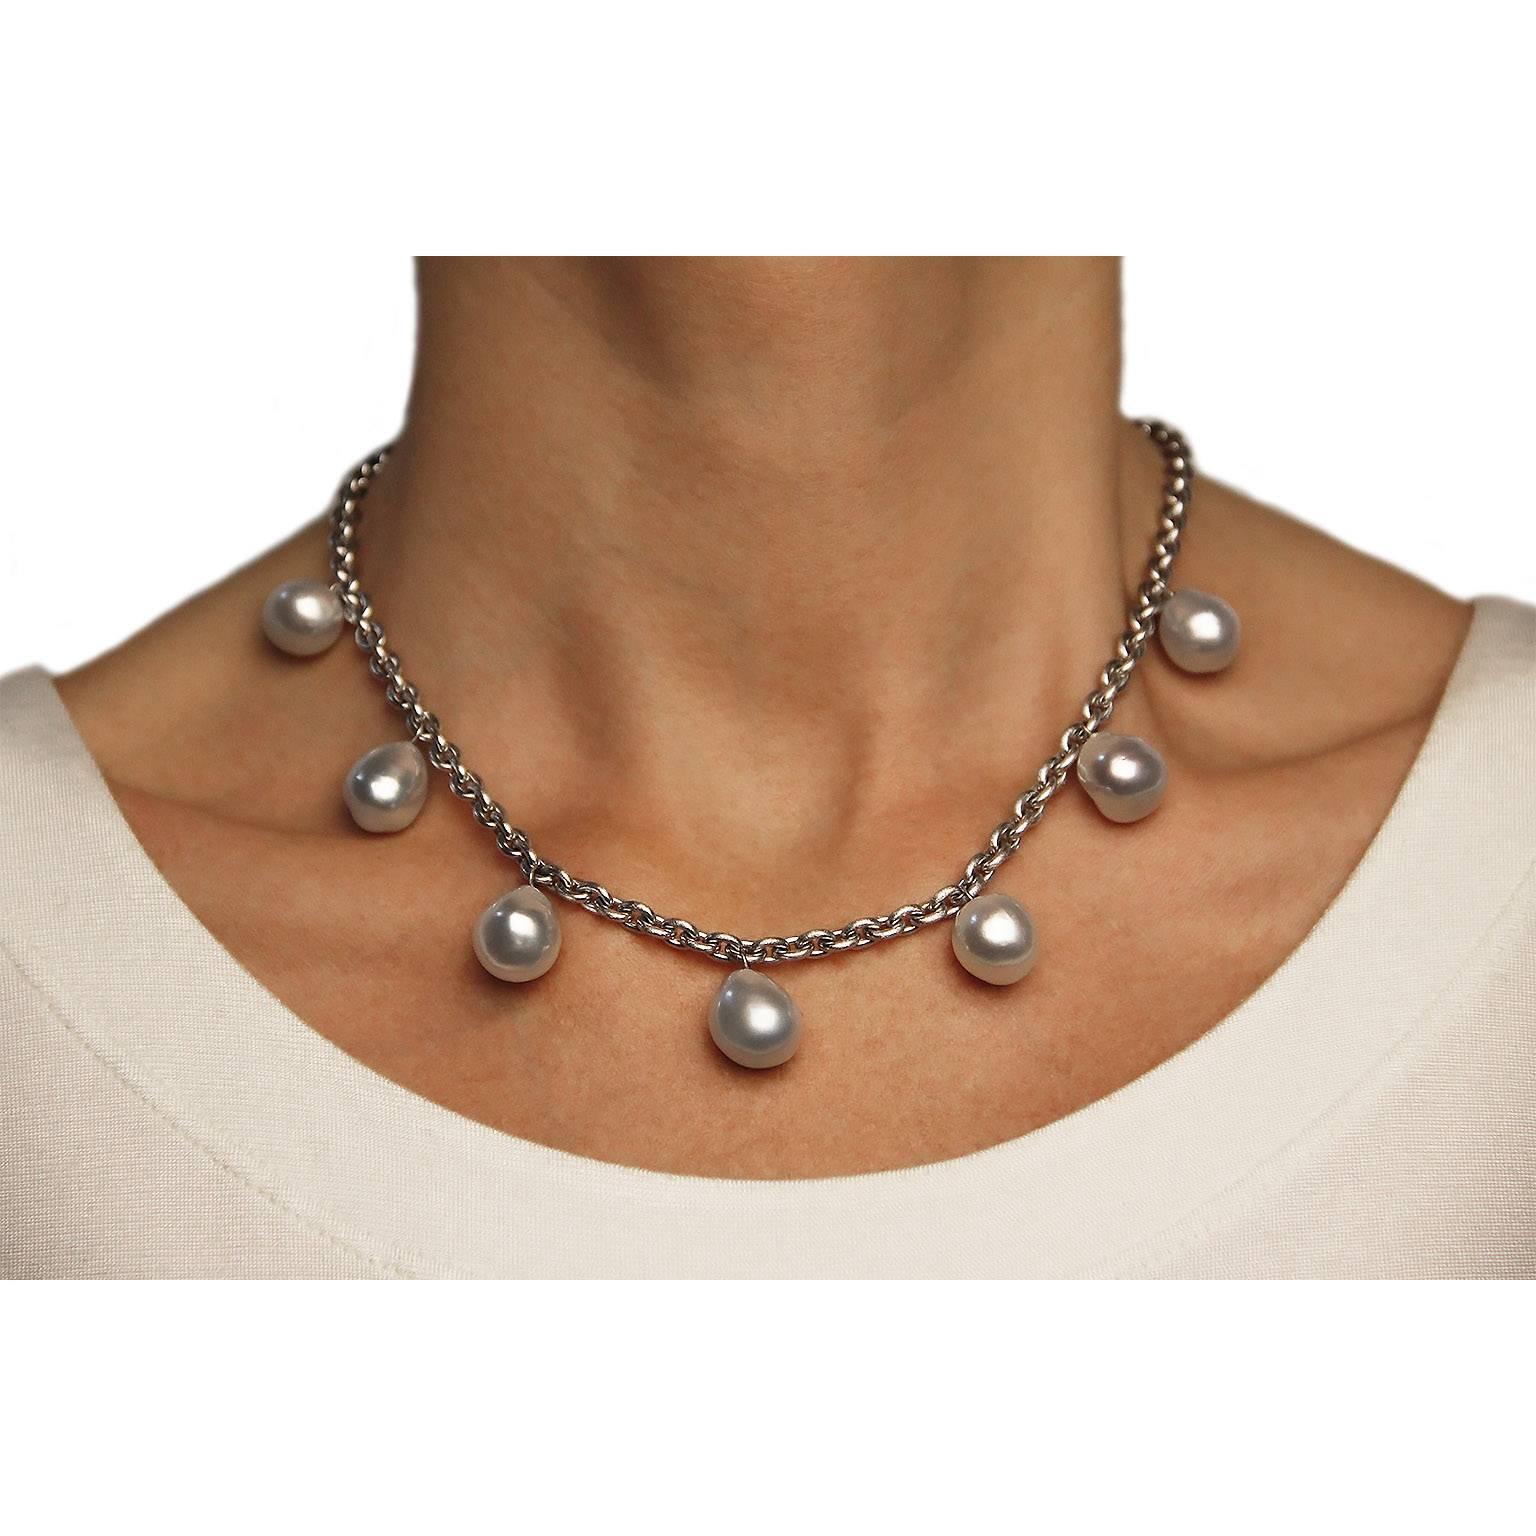 Jona design collection, hand crafted in Italy, 18 karat satin white gold chain necklace suspending seven light grey South Sea baroque pearls.
All Jona jewelry is new and has never been previously owned or worn. Each item will arrive at your door